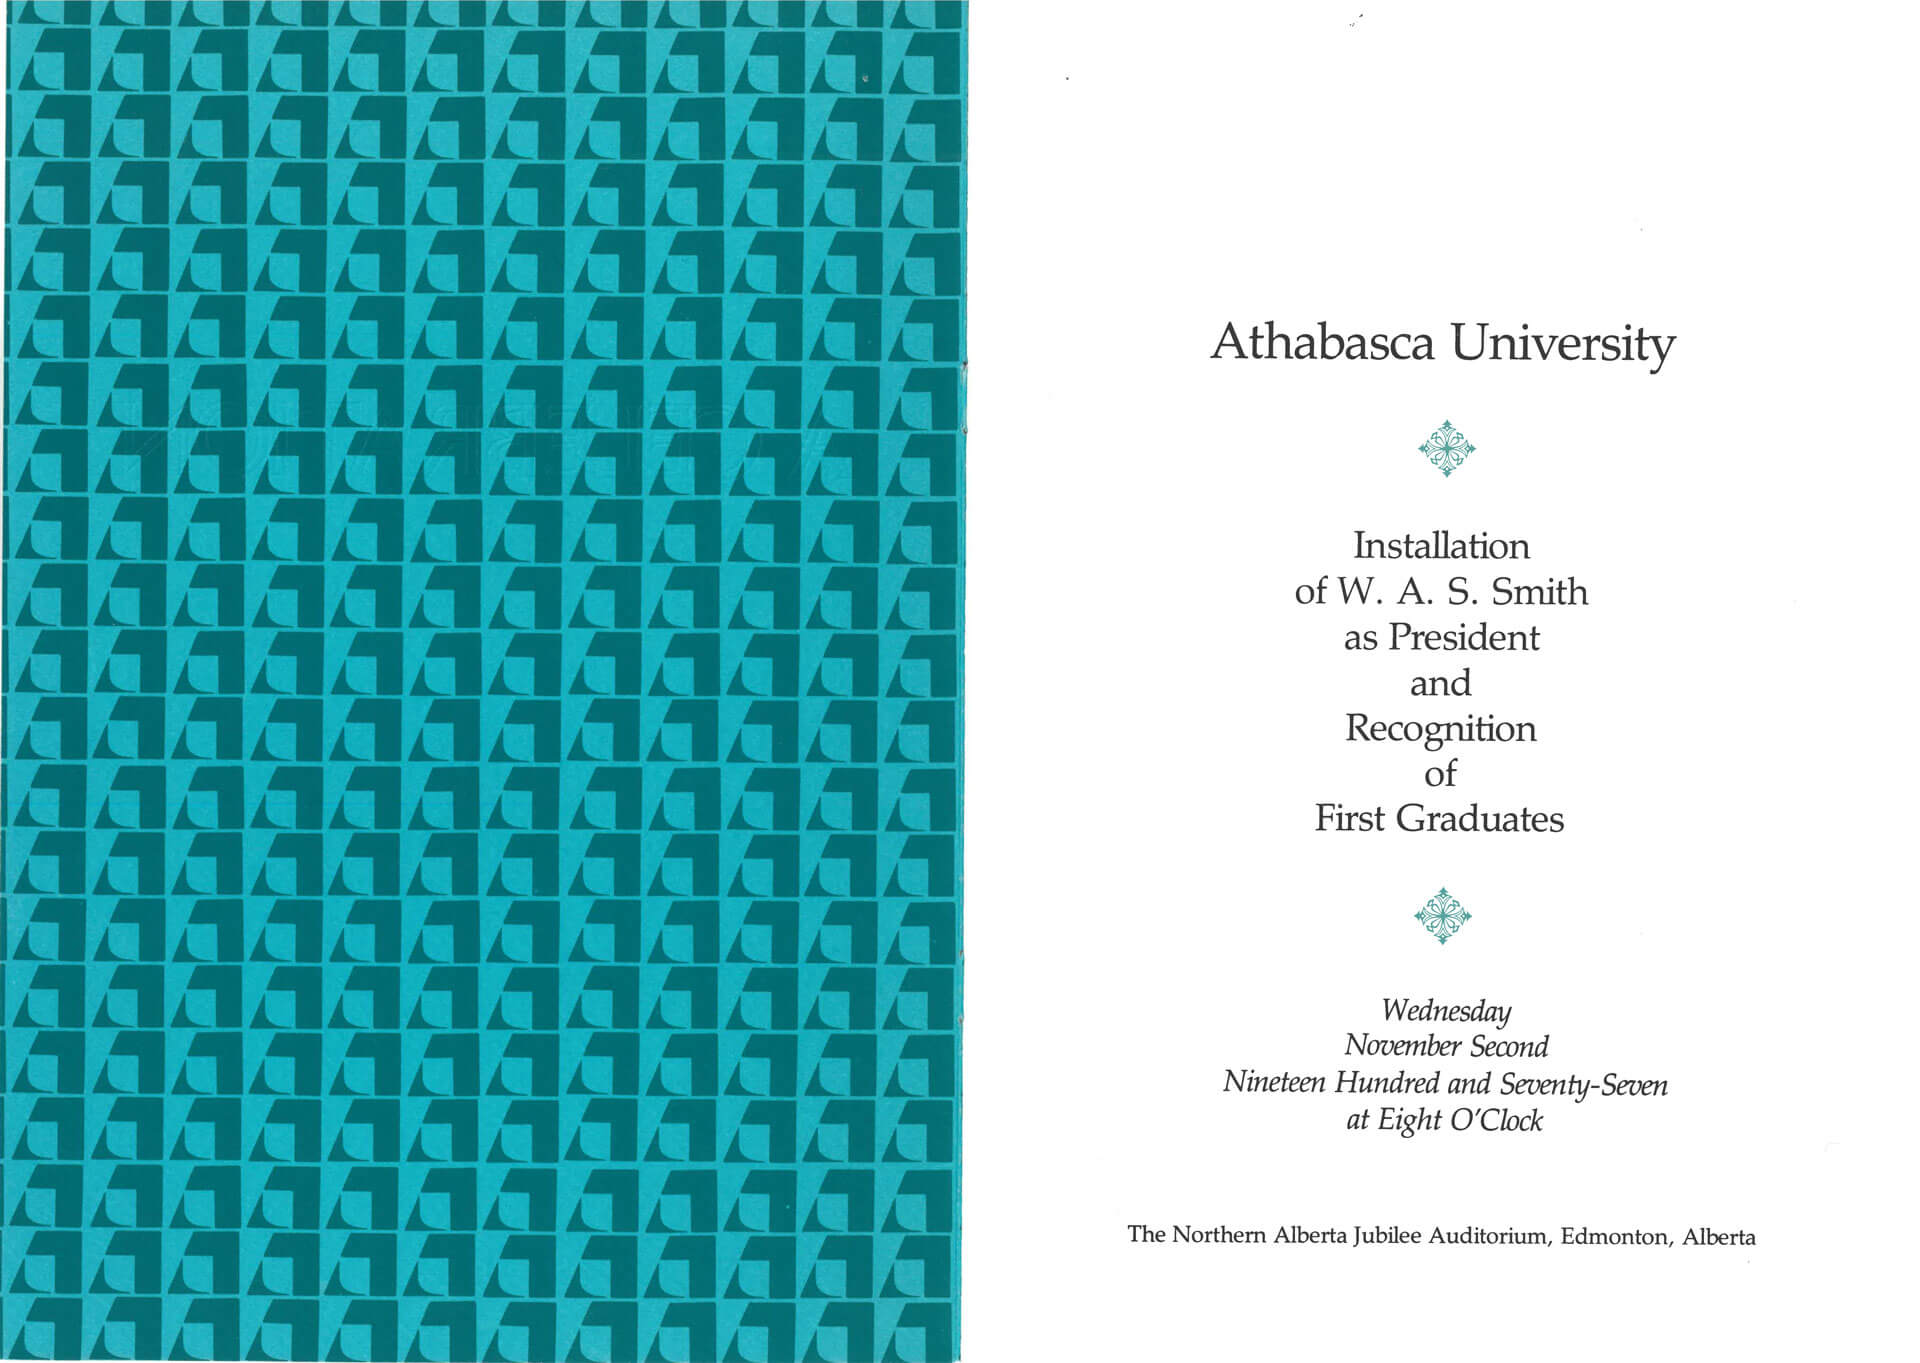 The image is from the inside cover of the 1977 convocation program and features the original AU logo in a teal-coloured pattern.